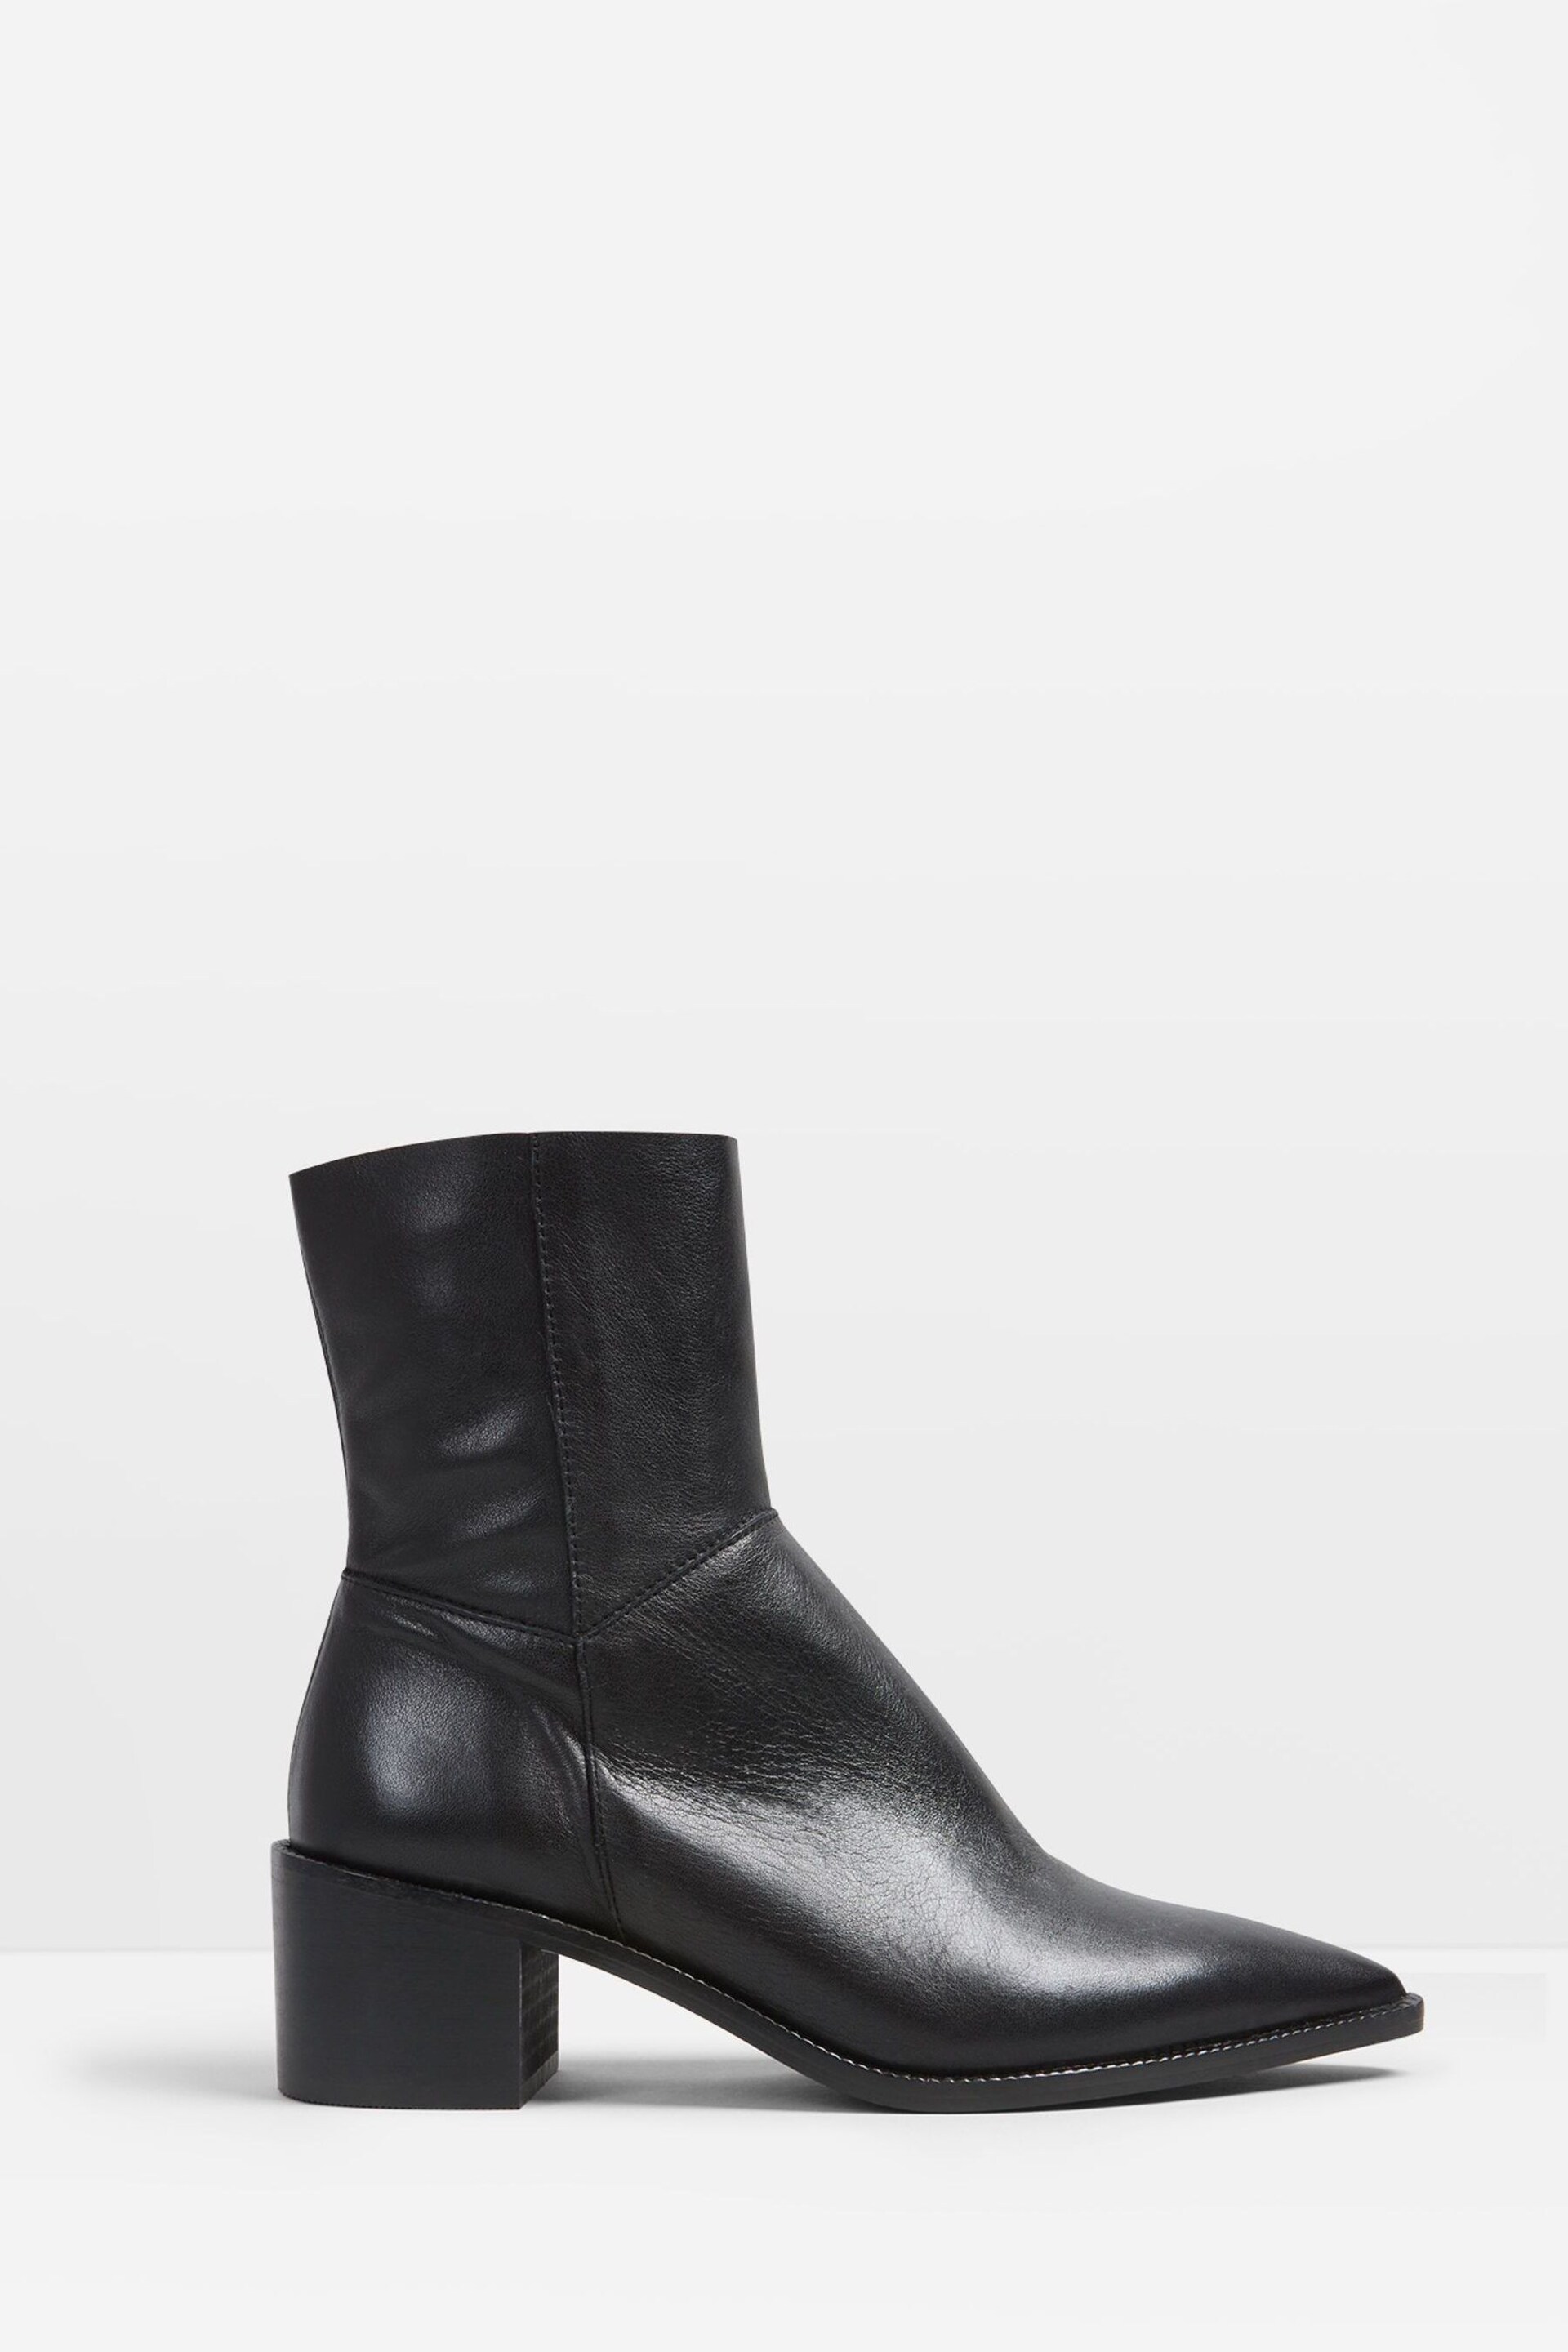 Hush Black Taylah Ankle Boots - Image 2 of 5